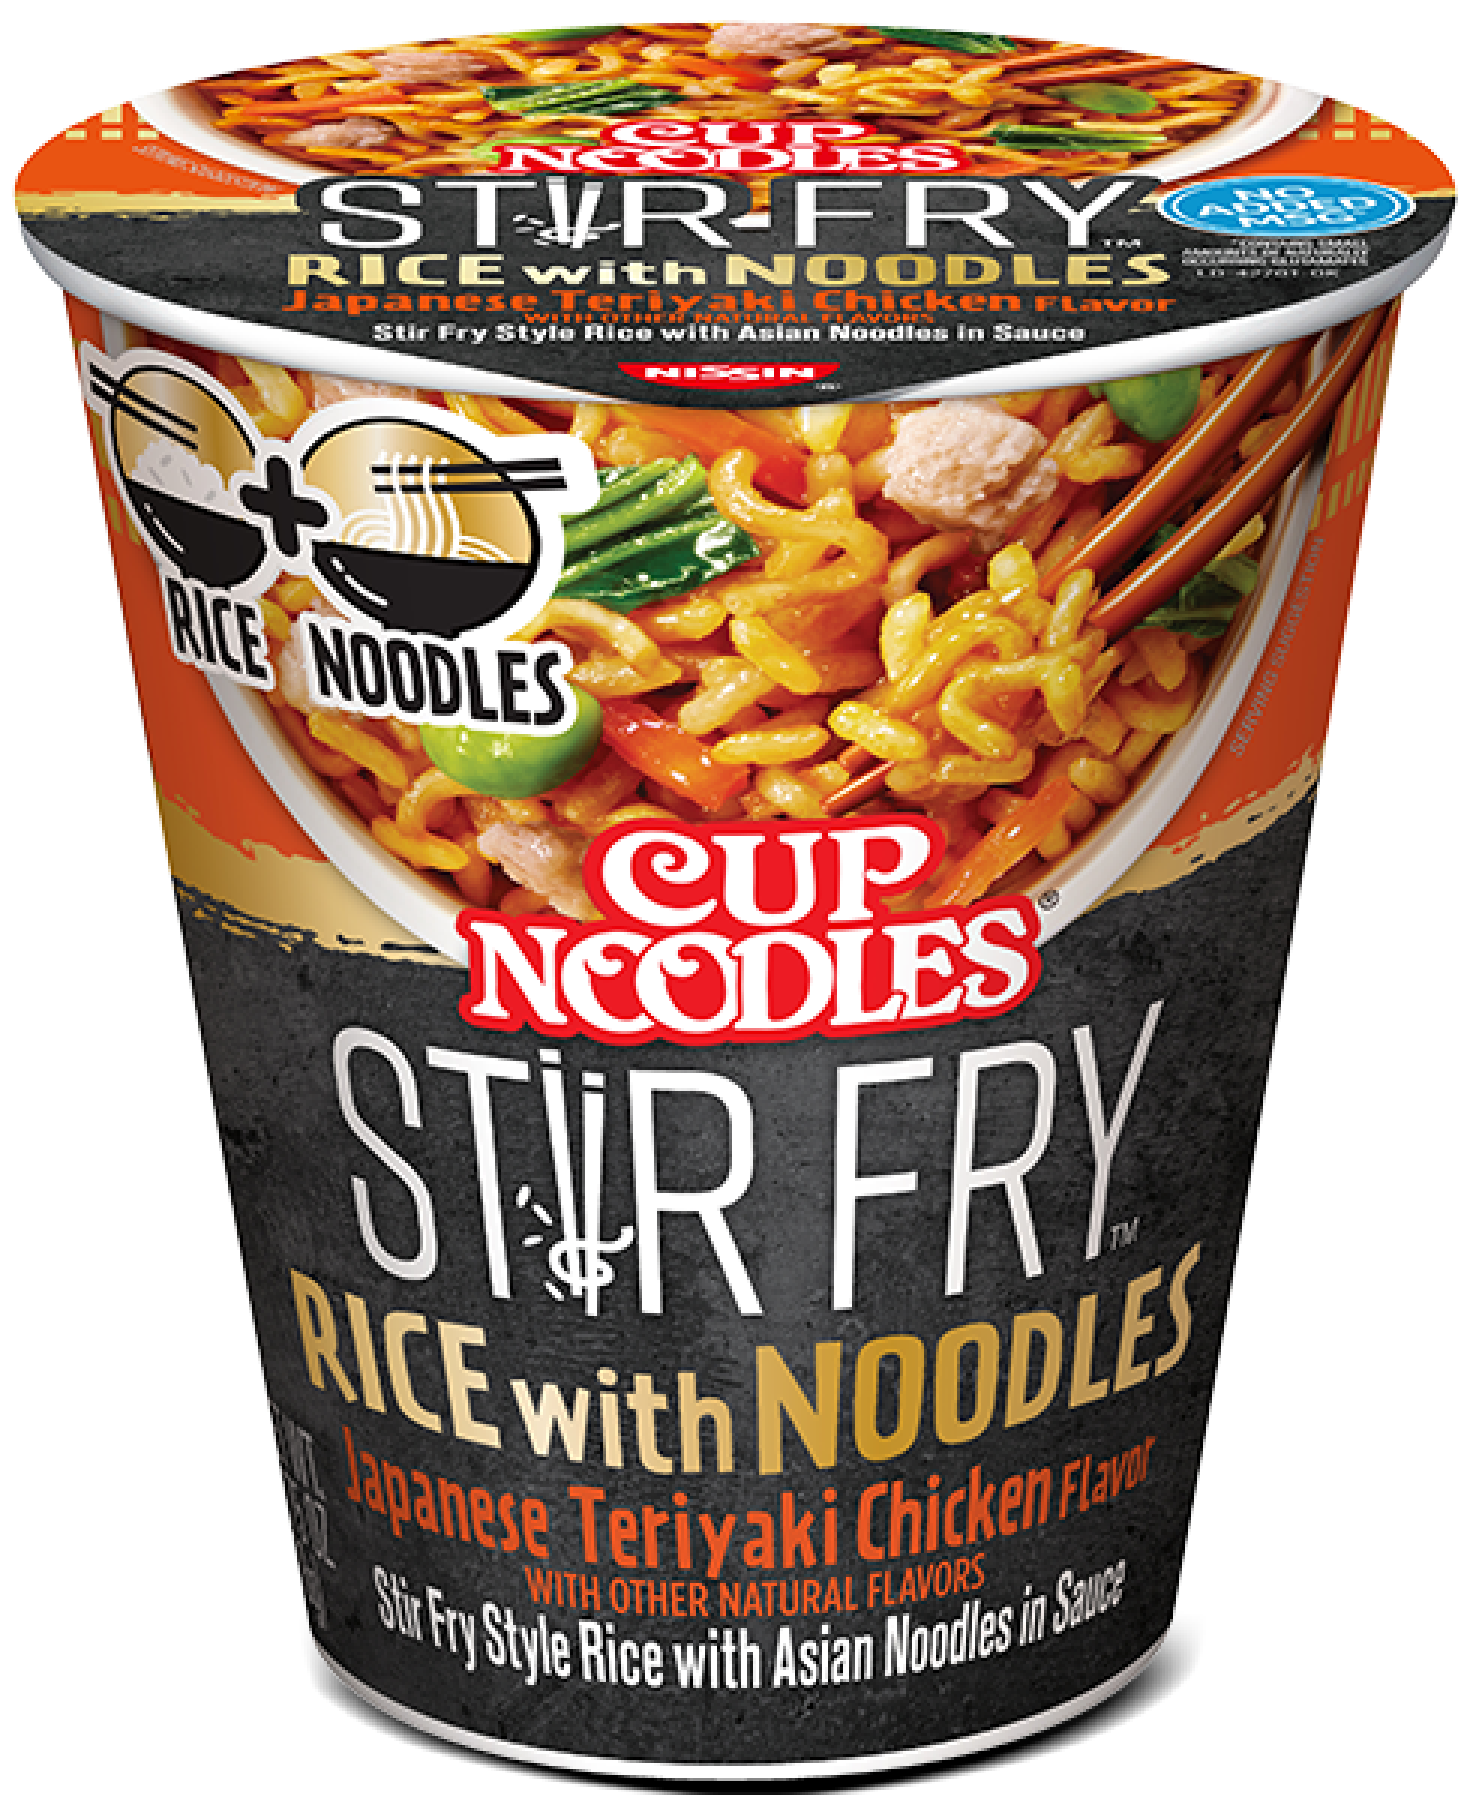 Cup Noodles Stir Fry Rice with Noodles Japanese Teriyaki Chicken